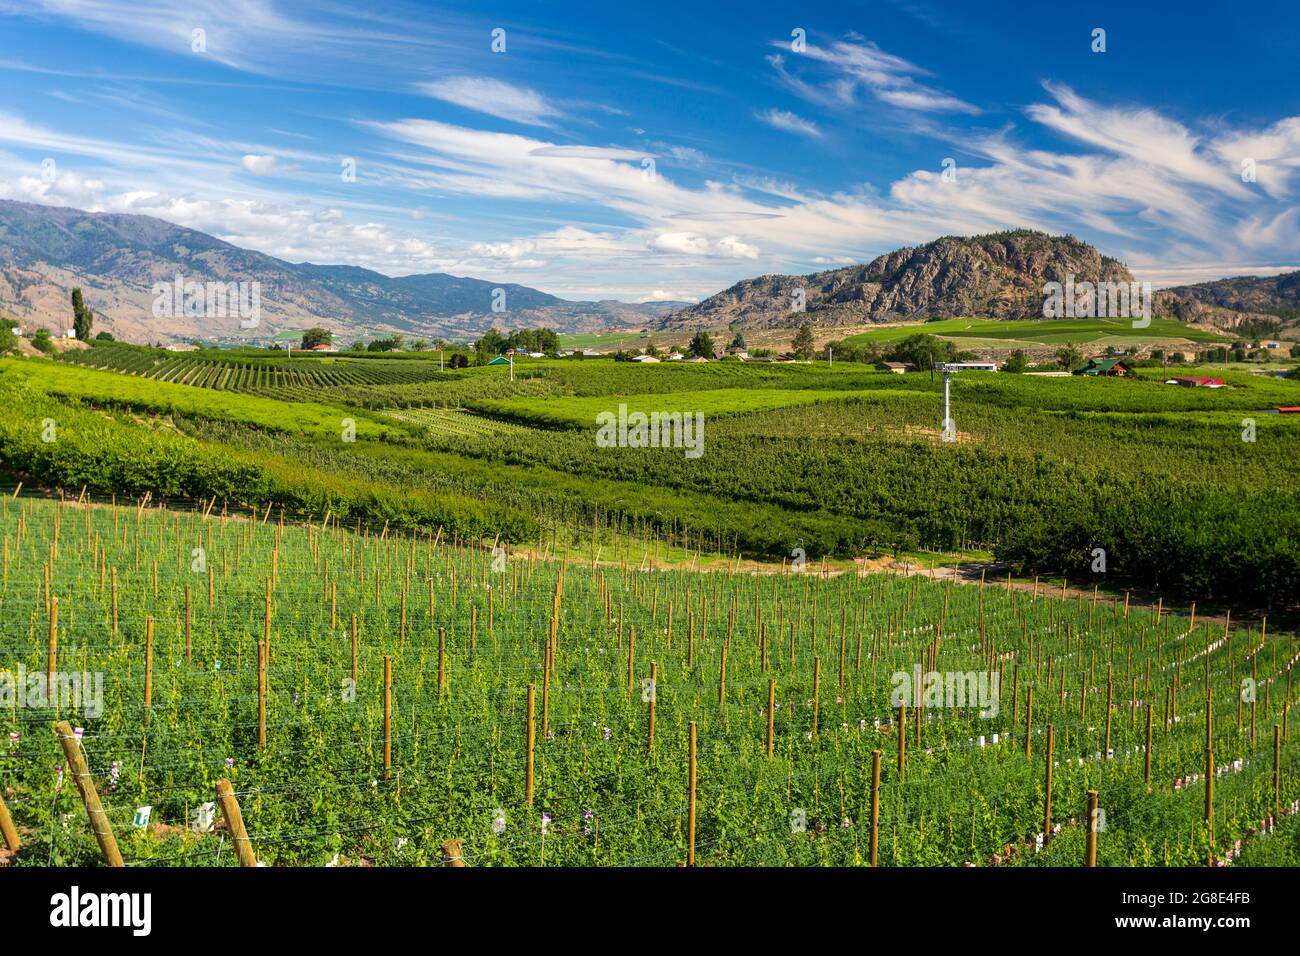 View of the agricultural landscape and vineyards during summer season in Osoyoos located in the Okanagan Valley, British Columbia, Canada. Stock Photo